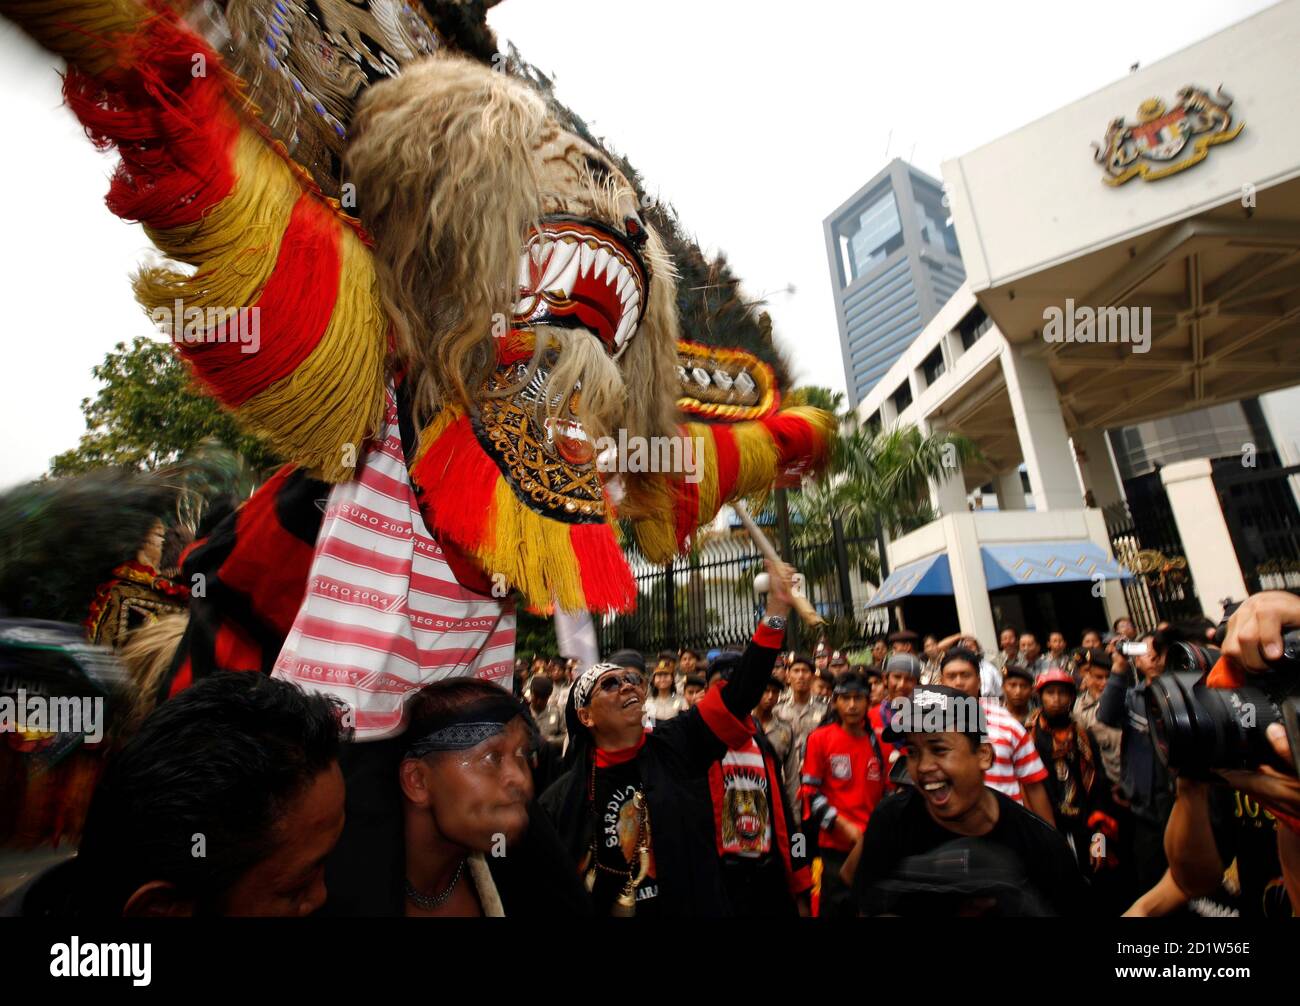 A Reog Ponorogo dancer performs during a protest outside Malaysia's embassy in Jakarta November 29, 2007. Hundreds of Indonesian Reog Ponorogo dancers held a colourful protest outside the Malaysian embassy as a new dispute erupted between the two neighbours over cultural heritage. REUTERS/Beawiharta (INDONESIA) Foto Stock